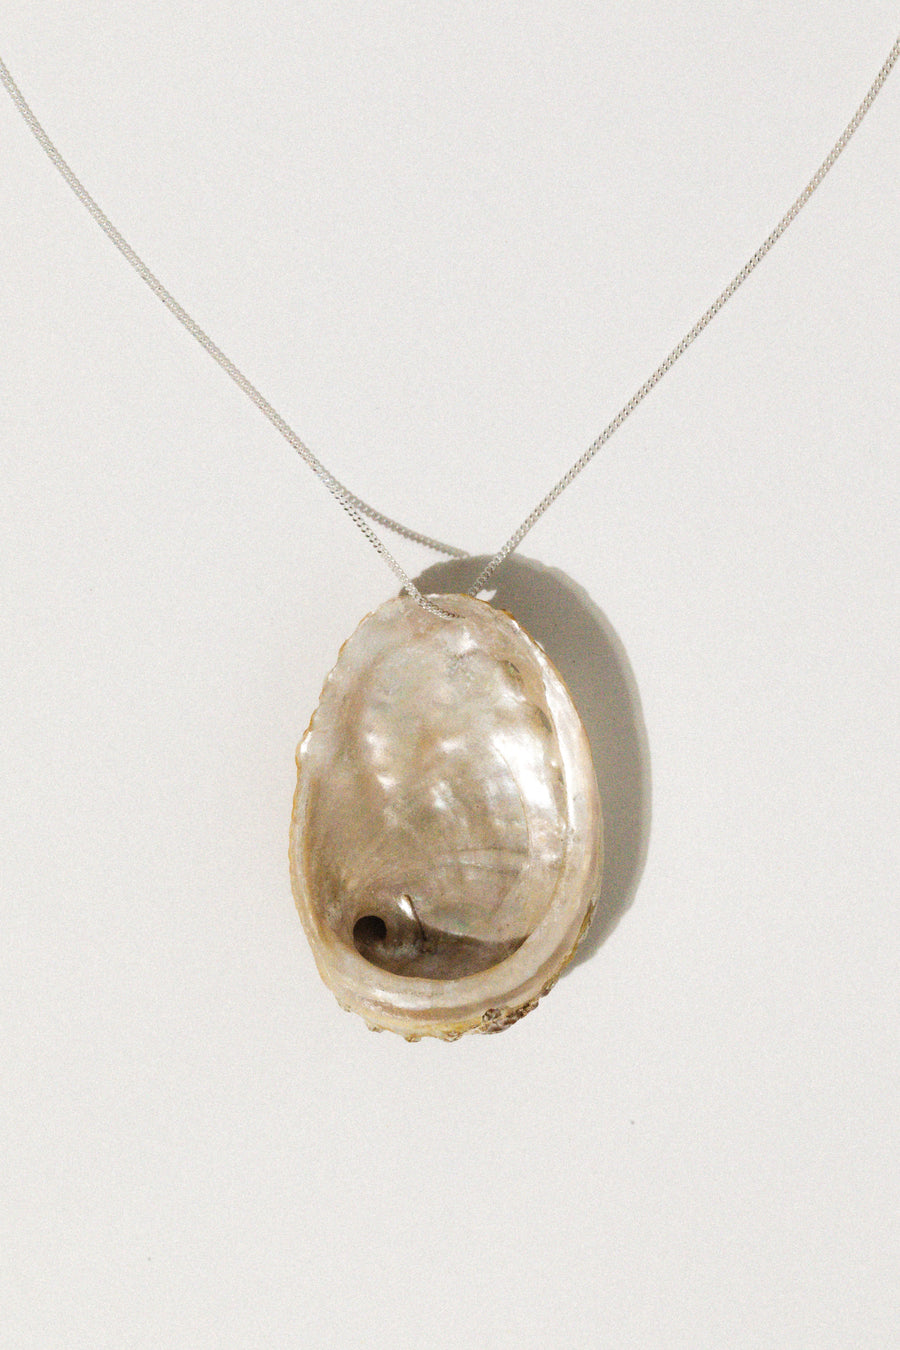 Silver Italiano Jewelry Silver / 16 inches Salty Siren Abalone Necklace .:. Silver